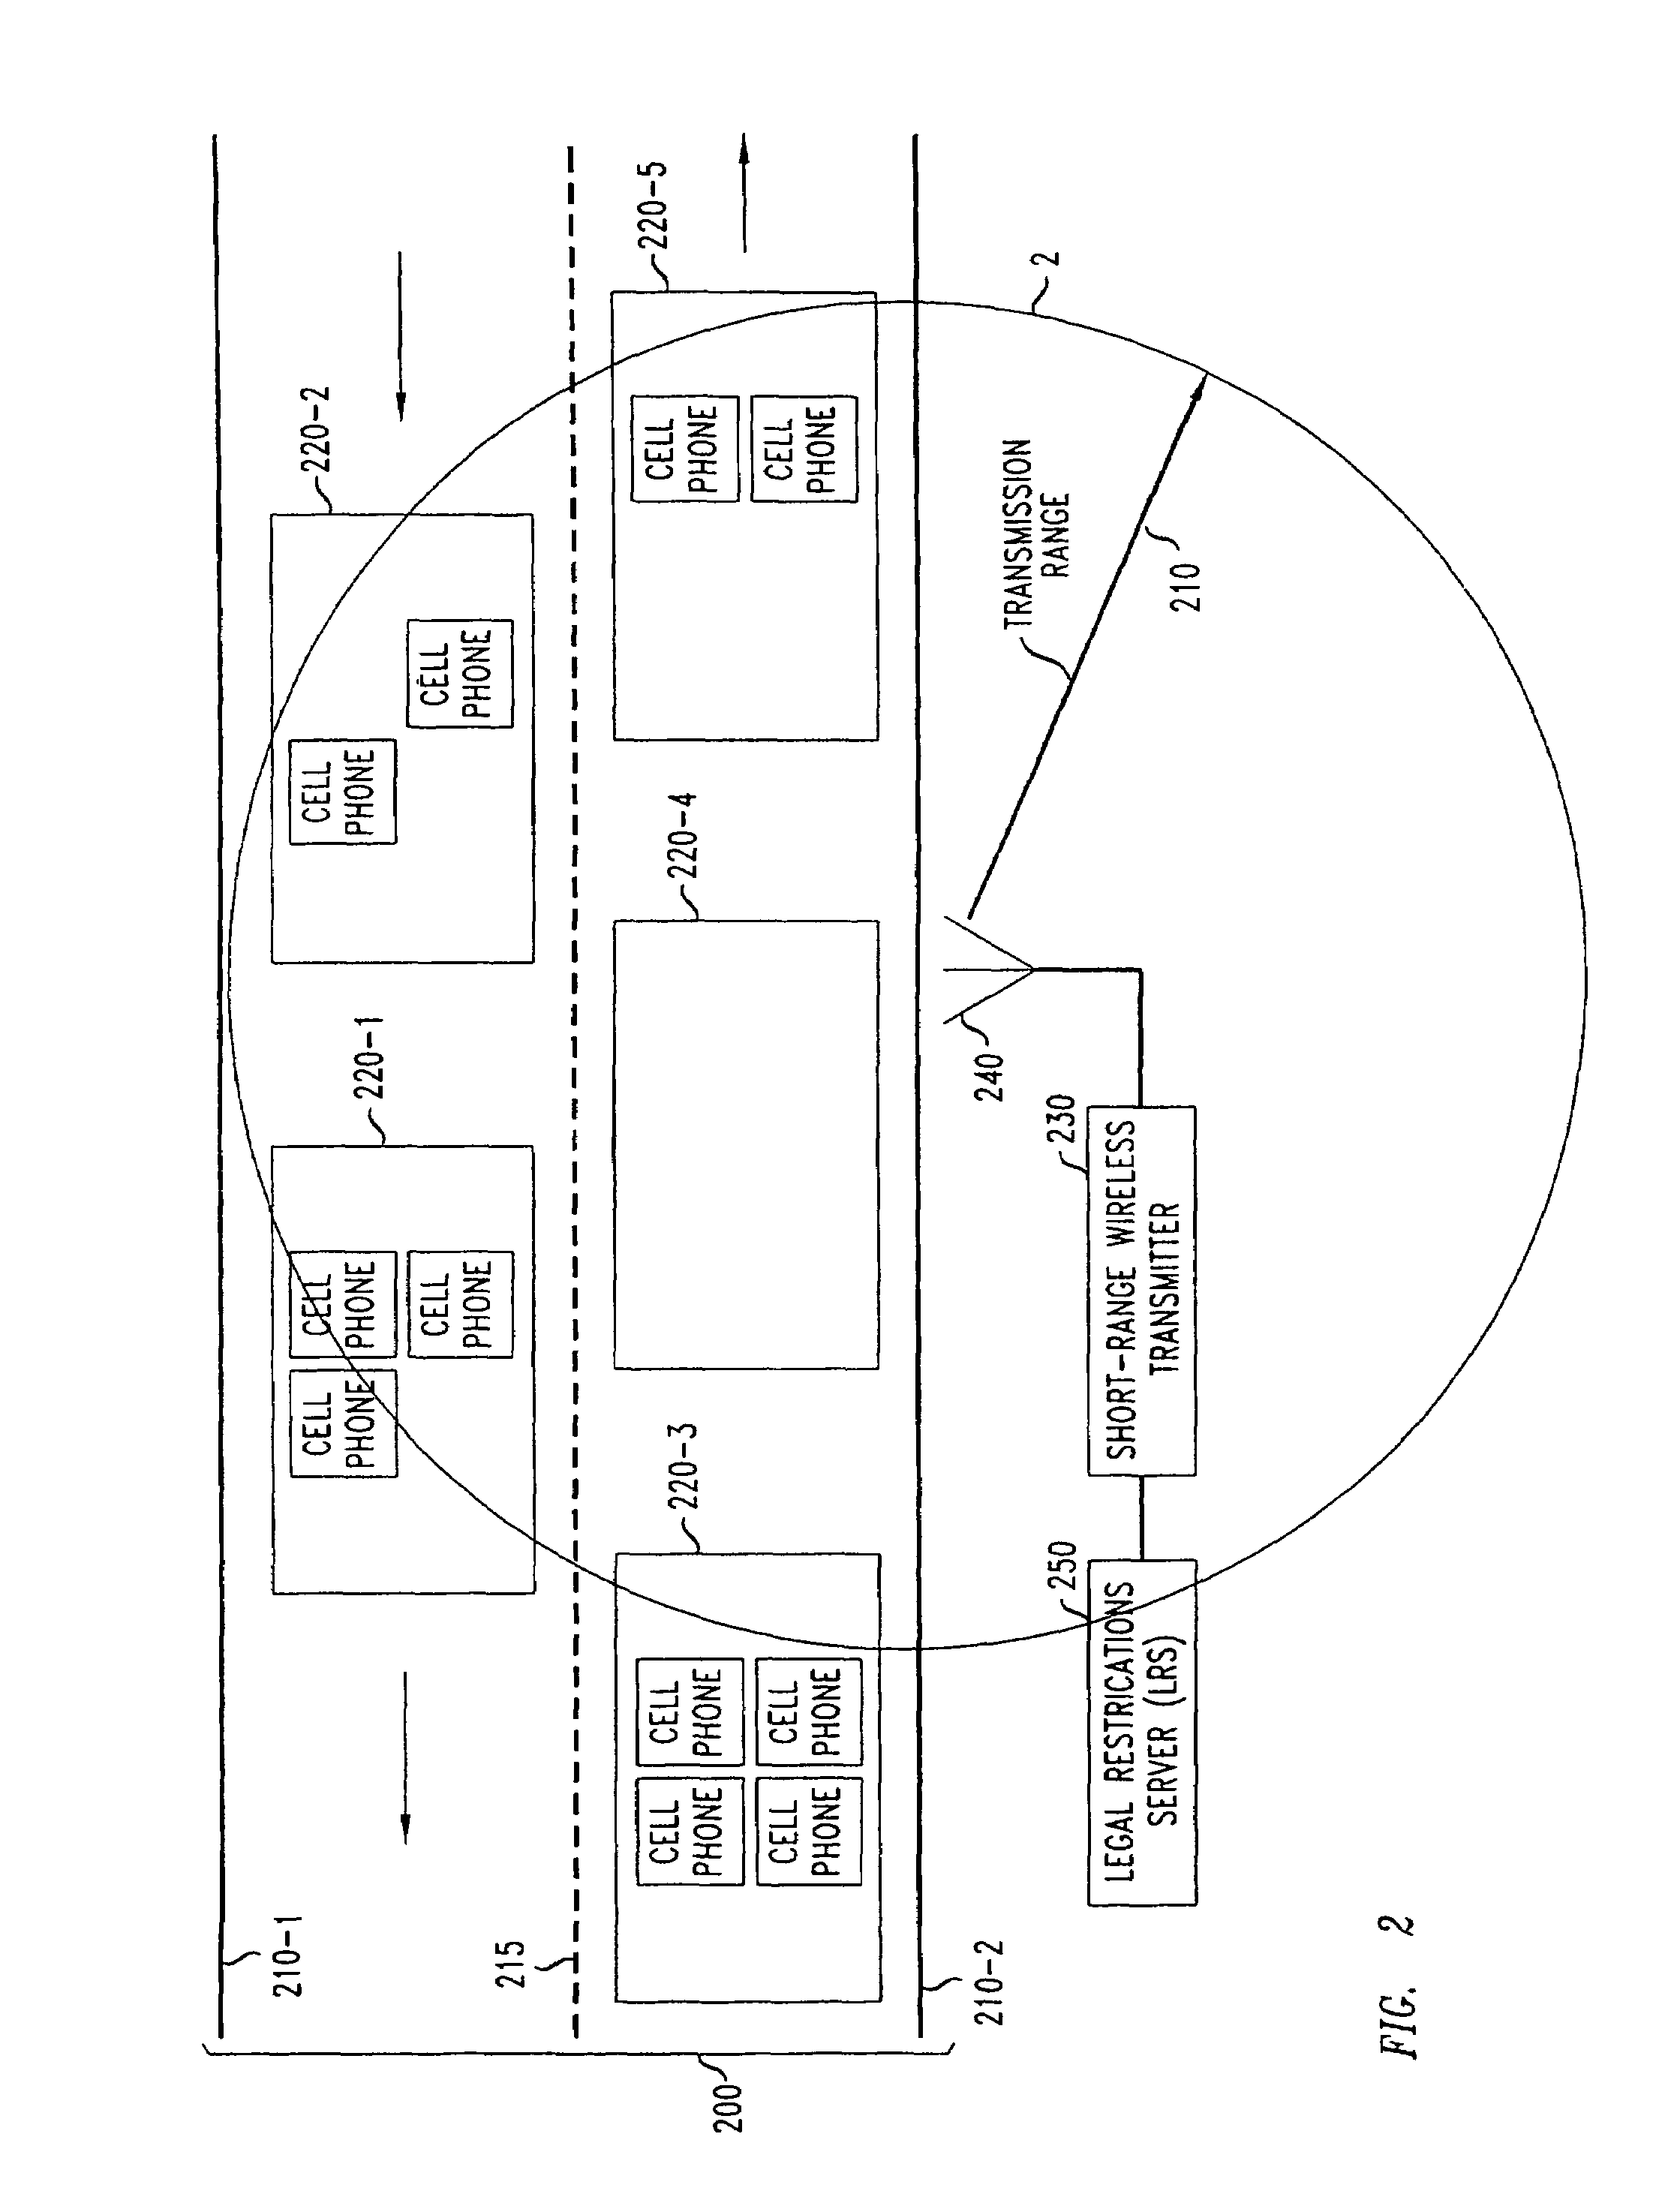 Modification of portable communications device operation in vehicles